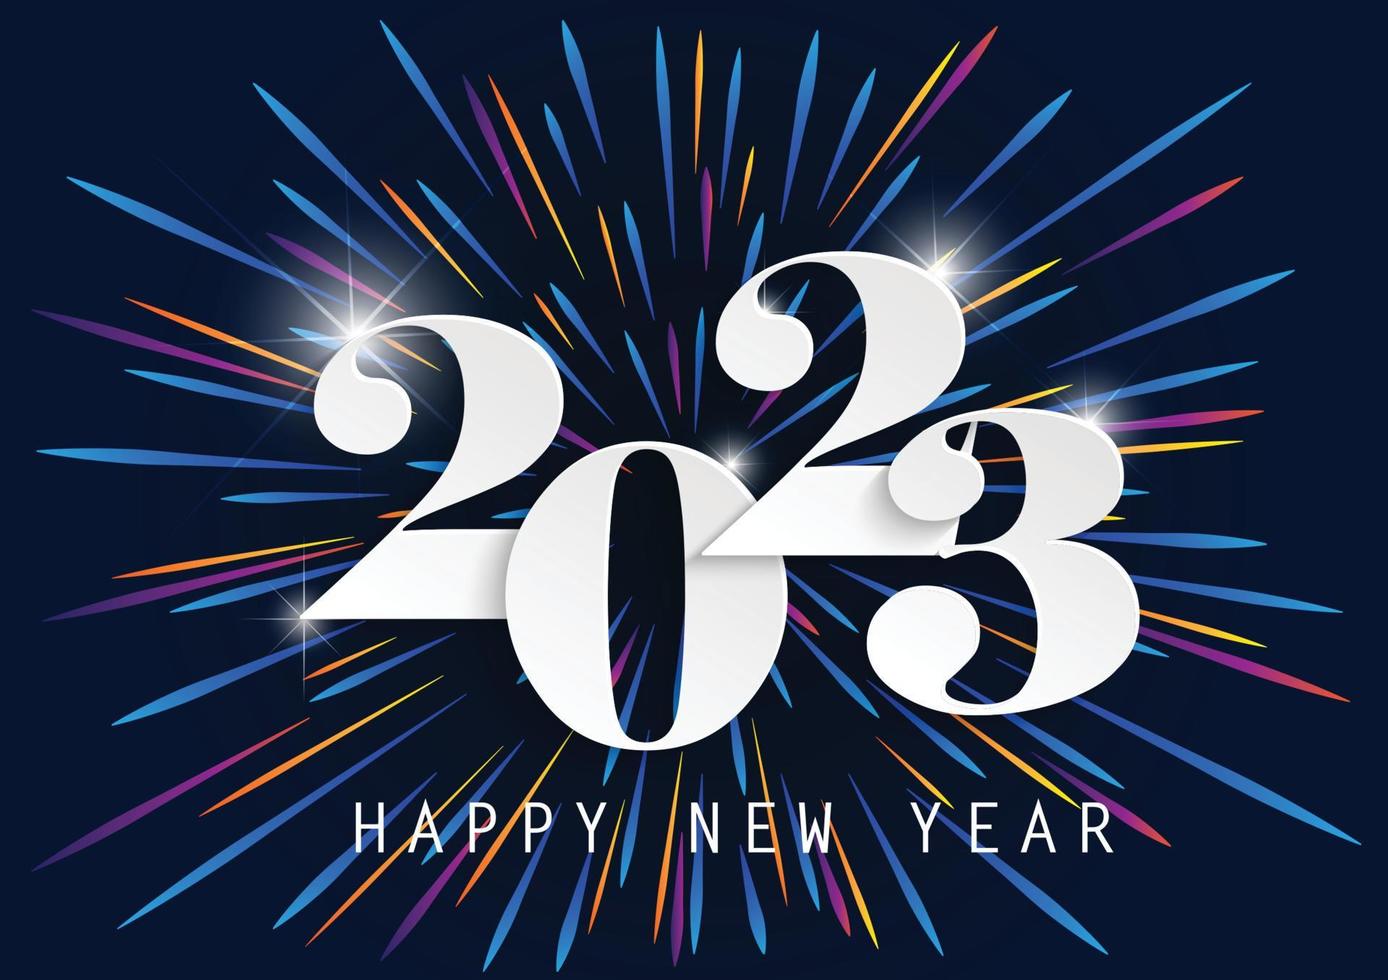 2023-happy-new-year-elegant-design-of-paper-cut-white-color-2023-logo-numbers-on-blue-backgrou...jpg